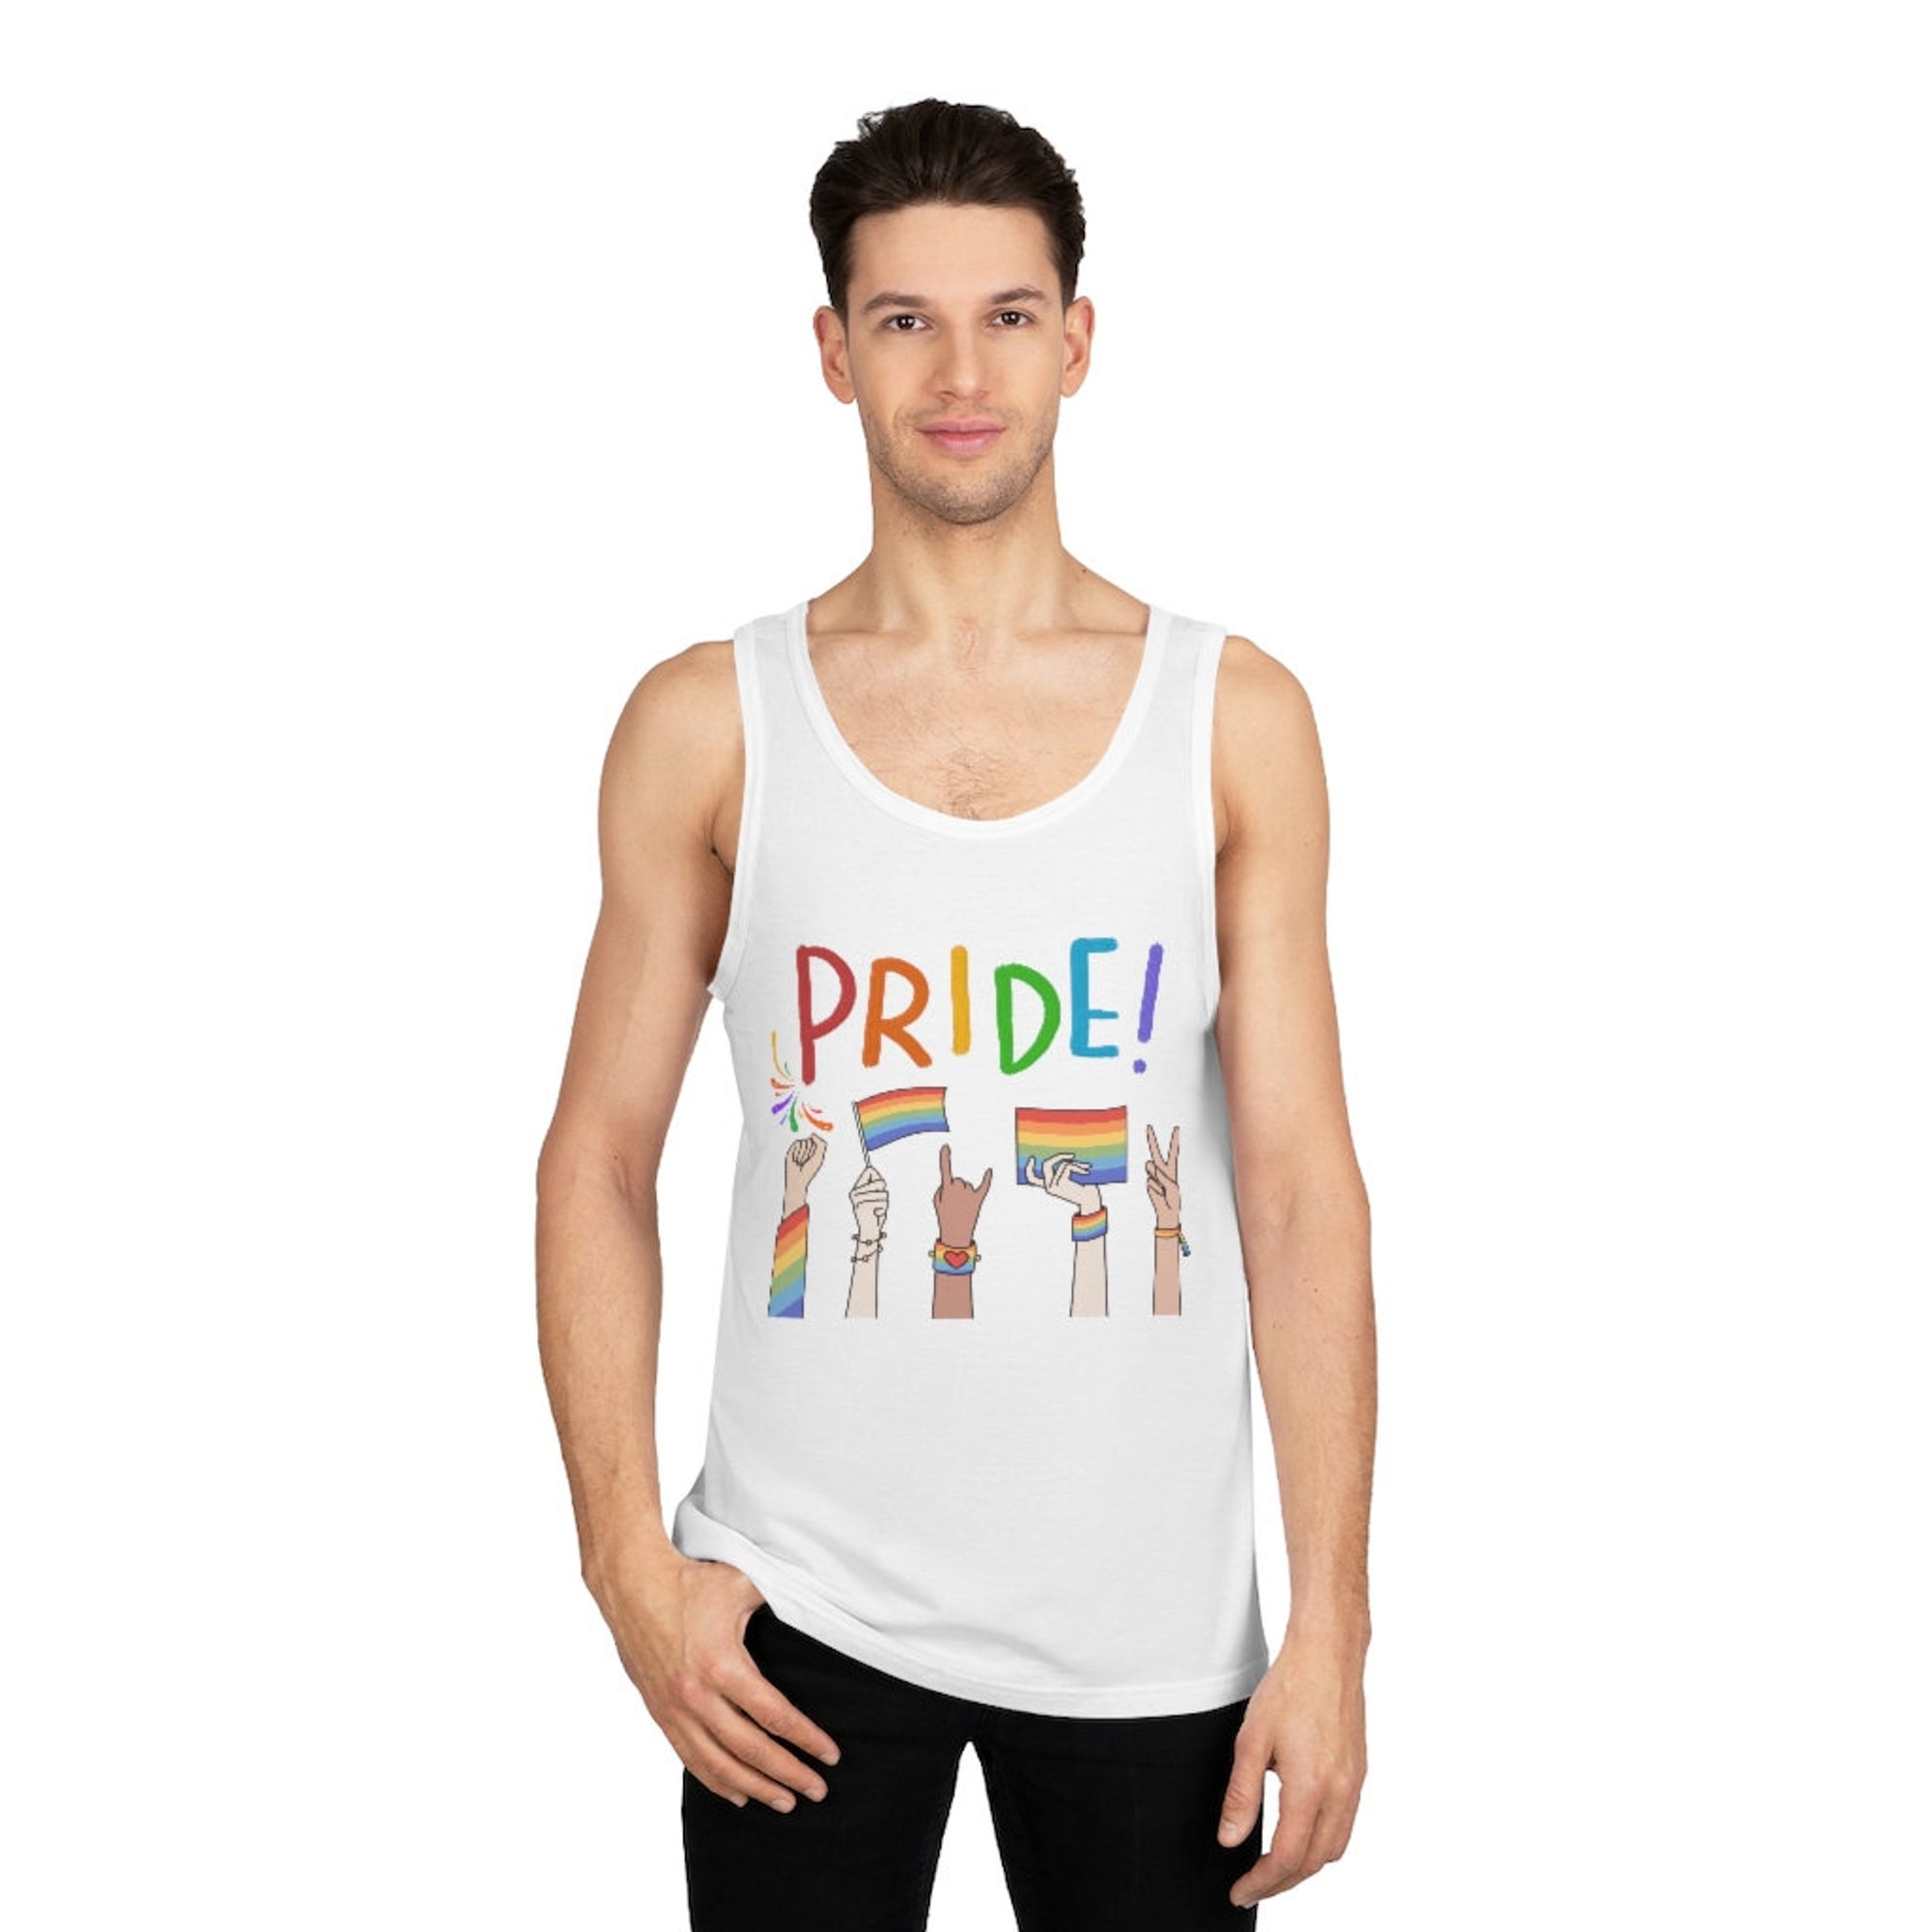 Discover Pride Month, Pride Tank, Soft-style Tank Top, LGBTQ